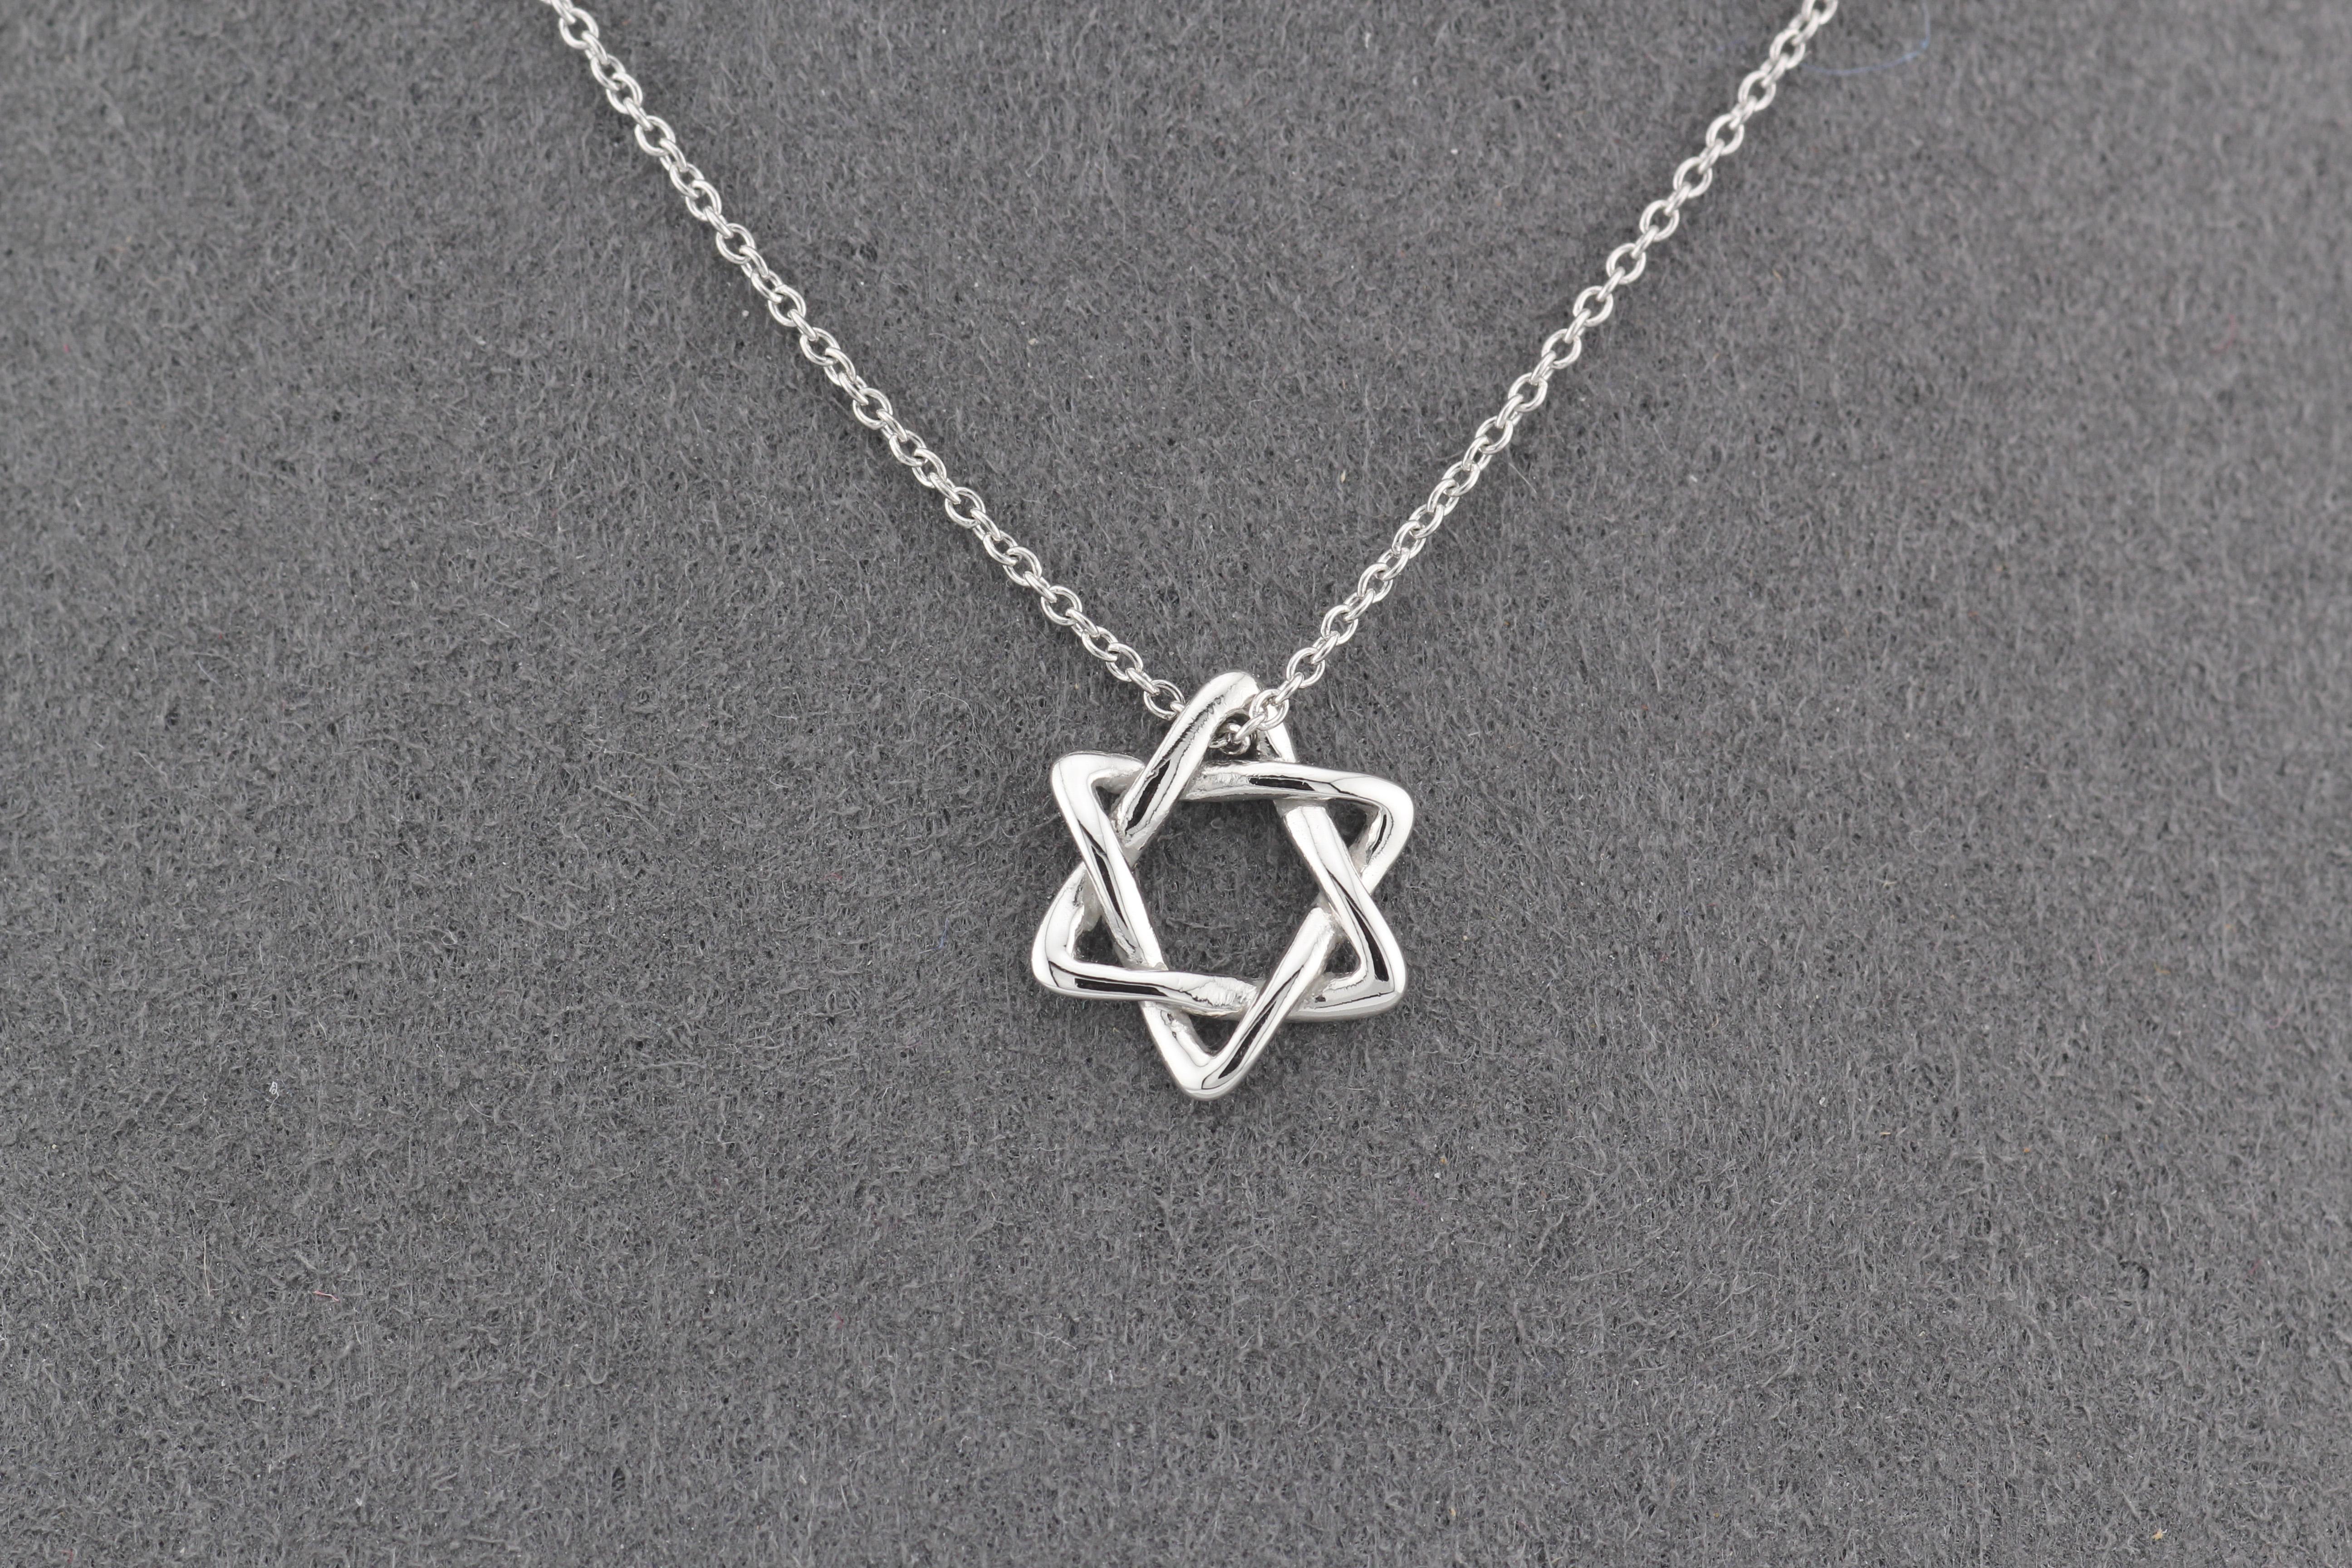 Introducing the Tiffany & Co. Elsa Peretti Star of David Platinum Small Necklace Pendant, a timeless and elegant expression of faith and style. Crafted with the utmost precision and artistry, this exquisite pendant is part of the iconic Elsa Peretti